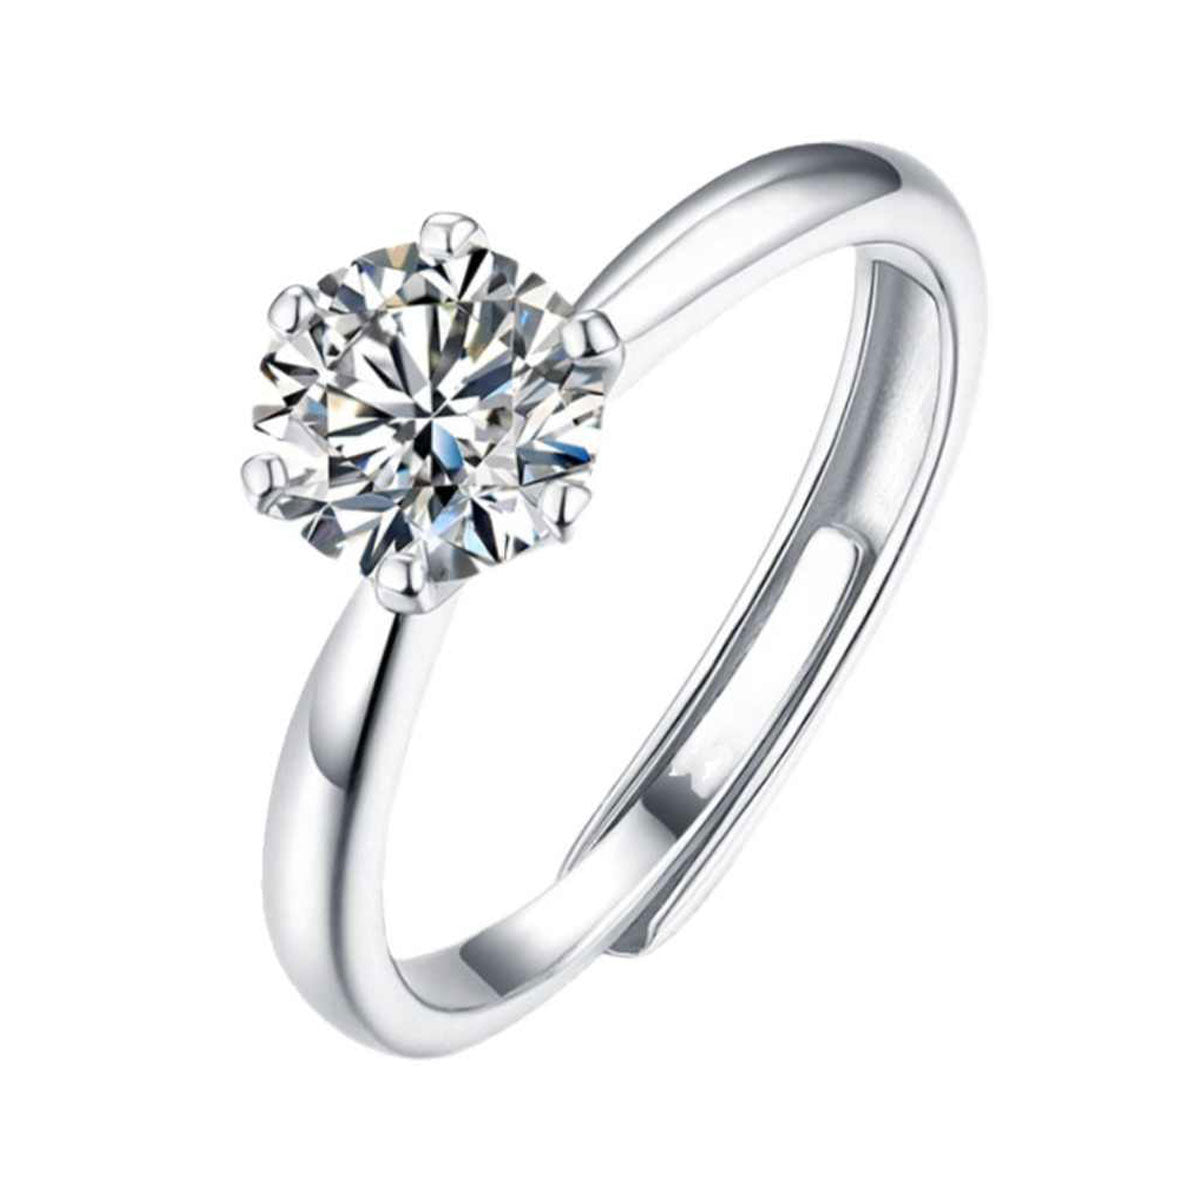 $5.99 Today: White Gold Prong Setting Round Cut Adjustable Moissanite Ring